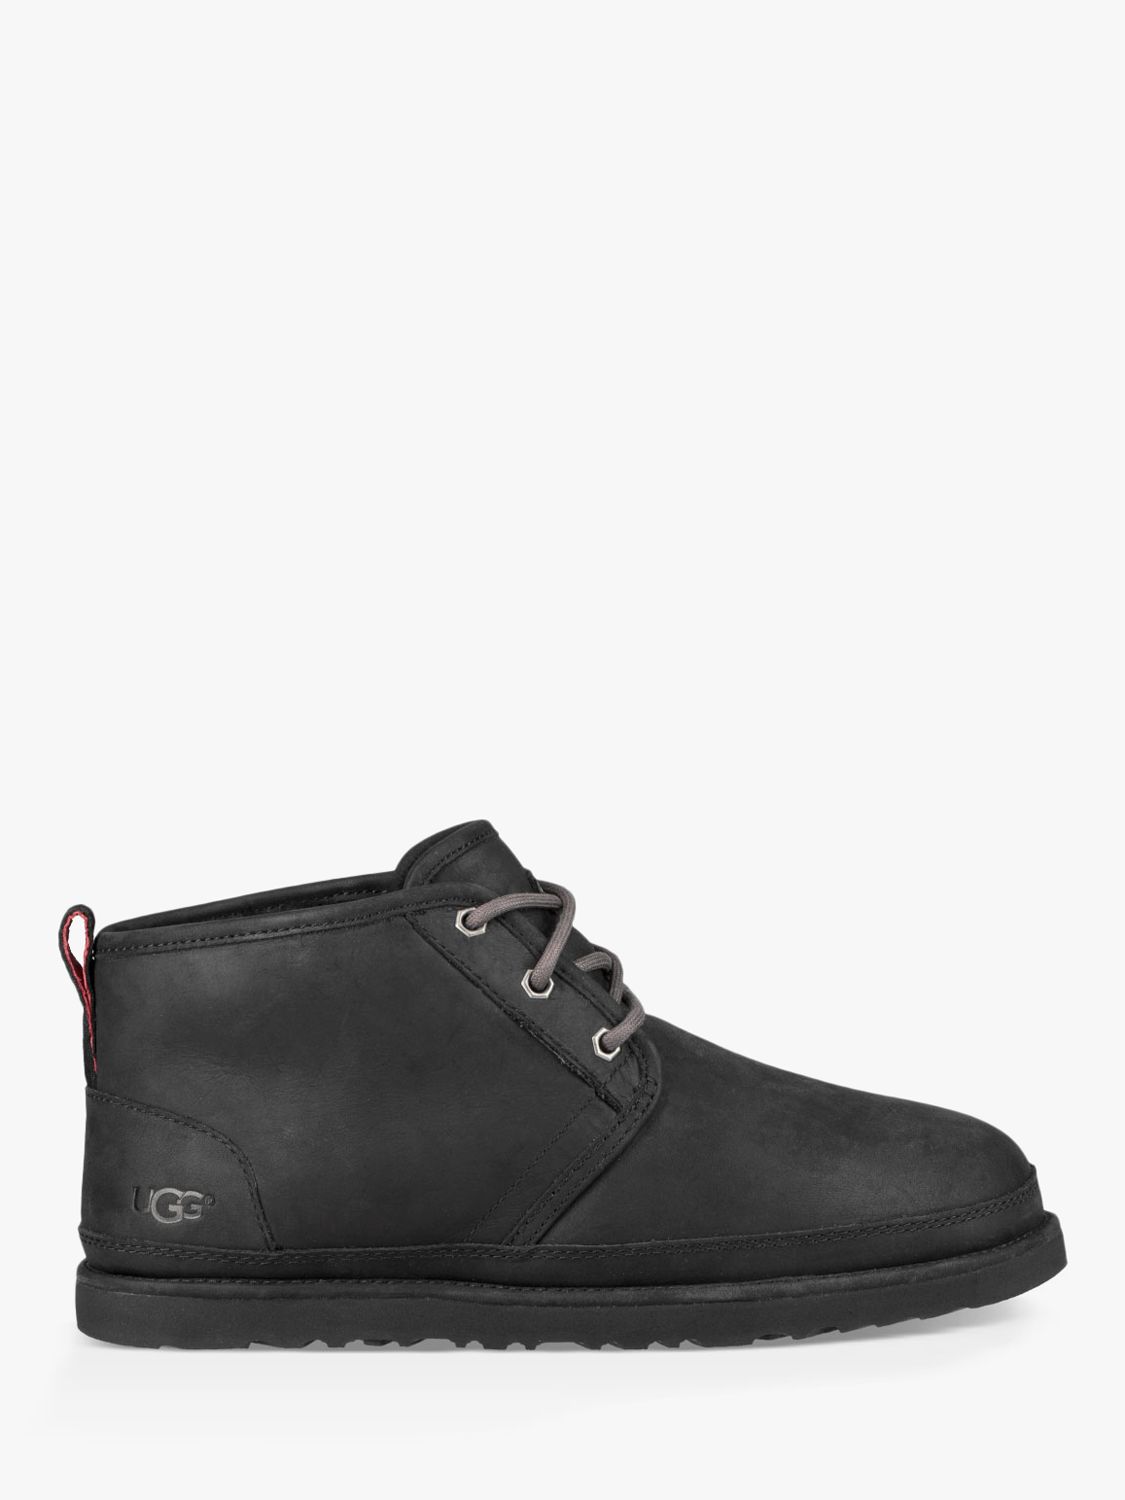 UGG Neumel Weather Leather Waterproof Boots, Black at John Lewis & Partners